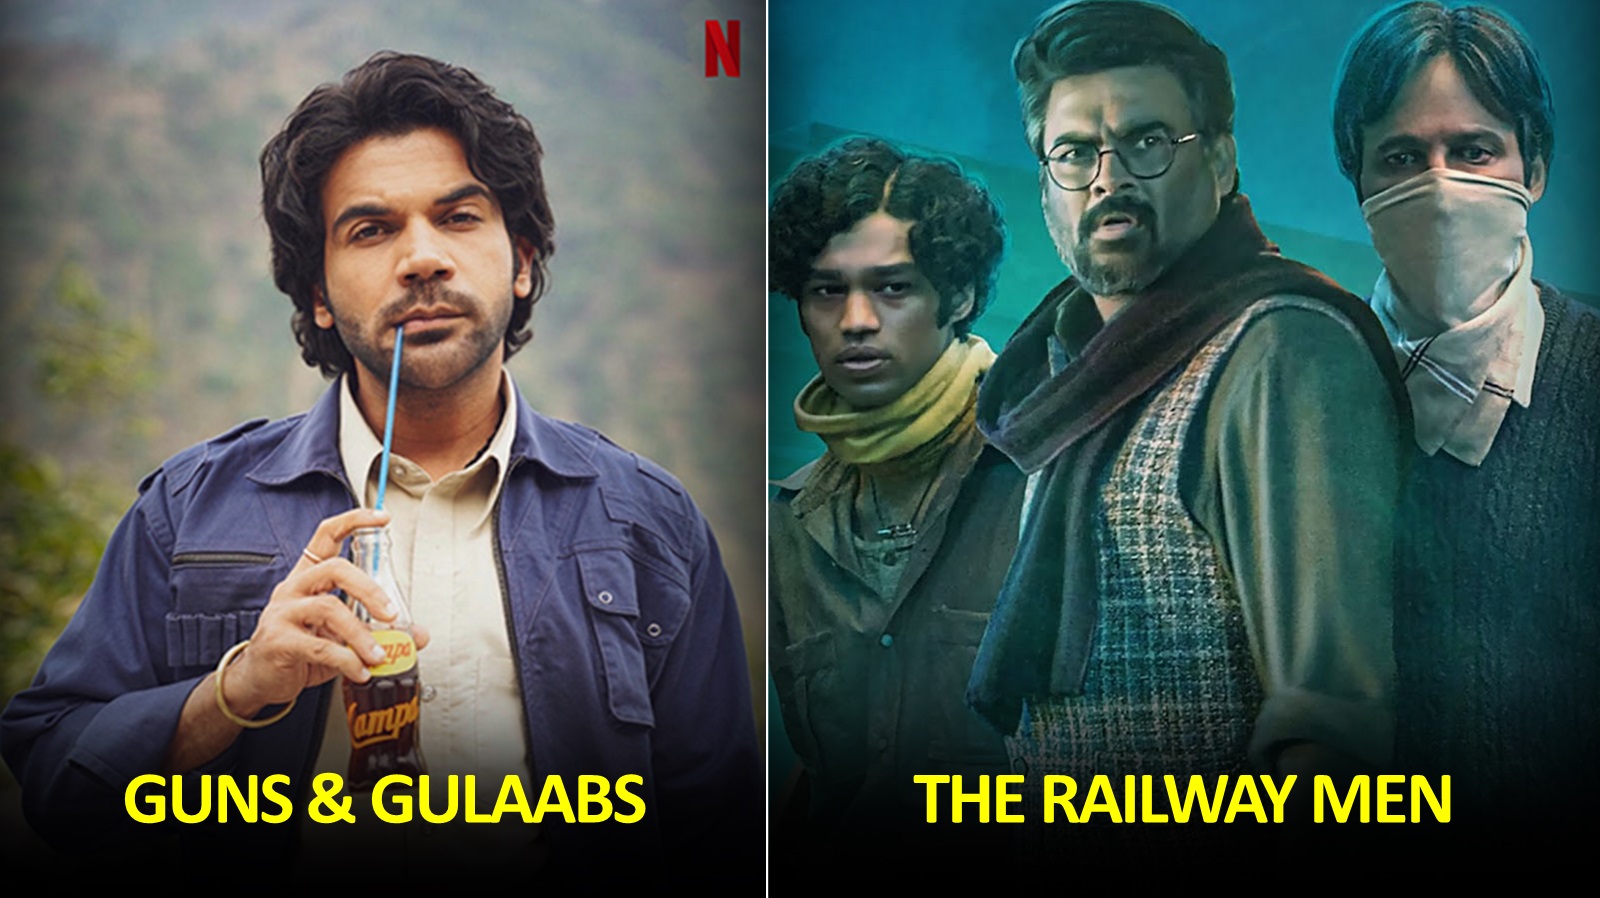 Couldn’t Find Anything Good To Watch? Here Are 10 Best Indian Shows On Netflix You Must Watch